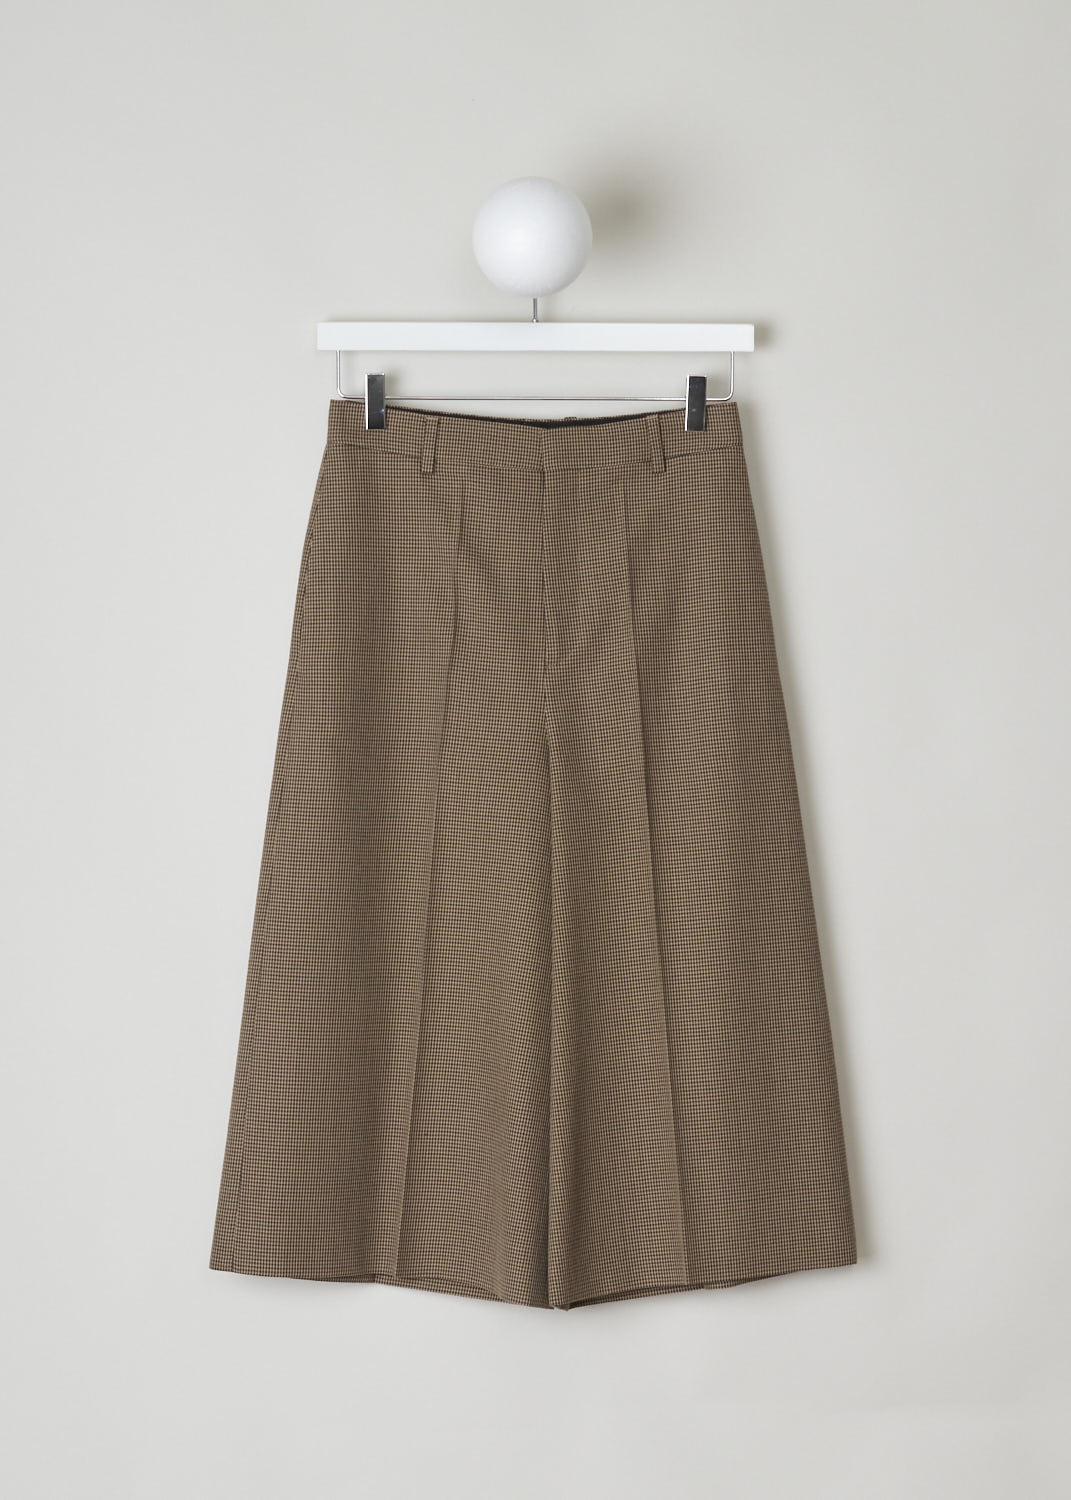 CELINE, BROWN HOUNDSTOOTH CULOTTES, 868H_2P233_28BZ, Brown, Print, Front, Brown Houndstooth culottes made from wool. These pants have belt loops and the closing option on this model is a concealed hook, button and zipper option. In the front, along the length of the pants, a front pleat can be found. These pants have slanted pockets in the front and two welt pockets in the back.
